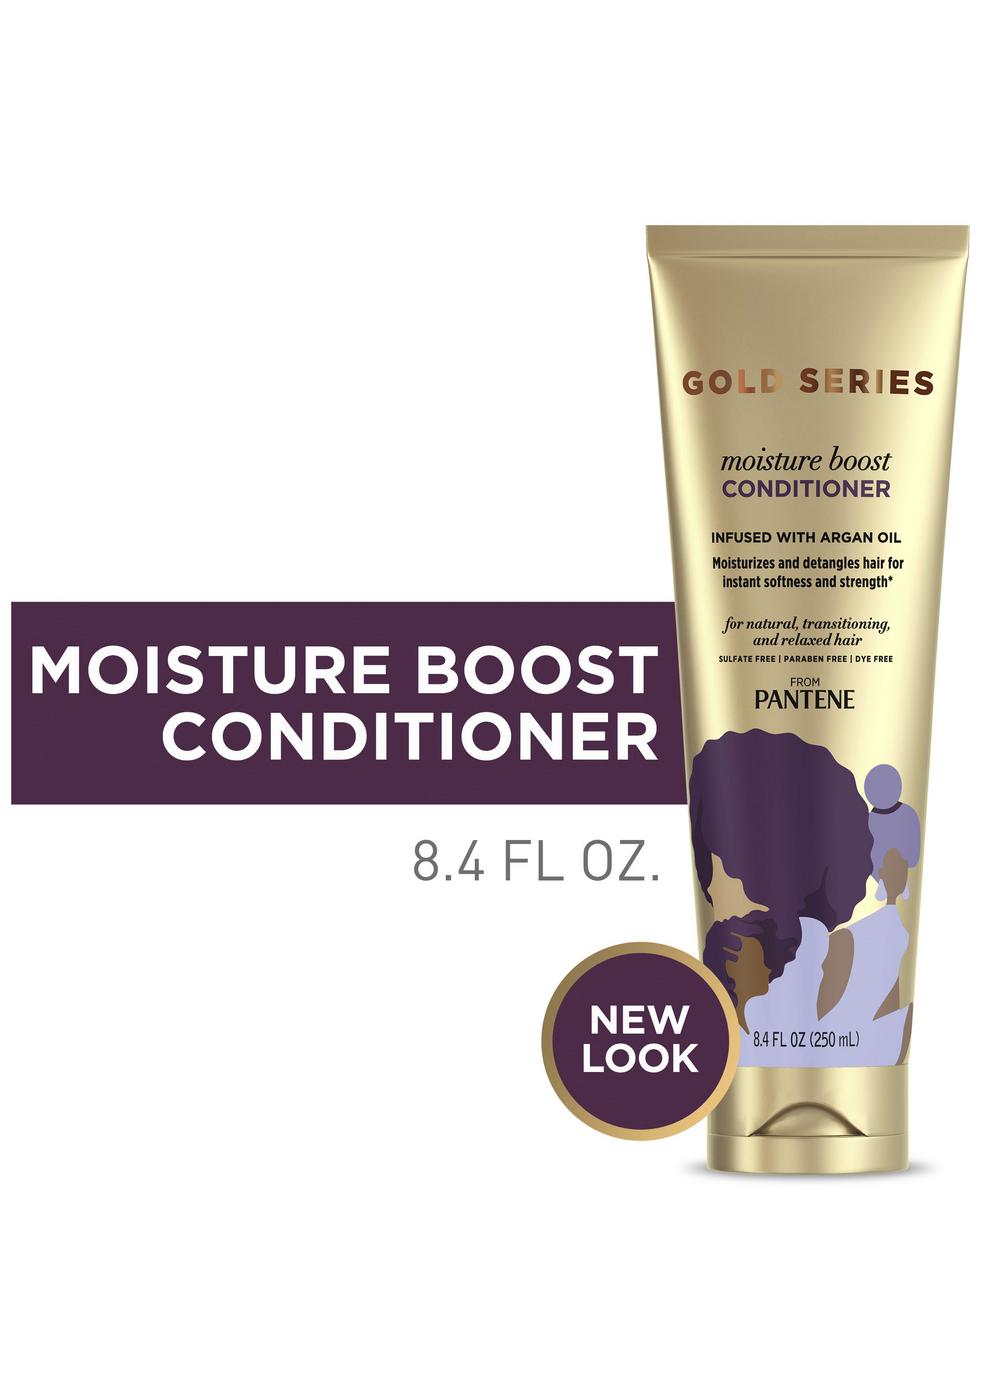 Pantene Gold Series Moisture Boost Conditioner; image 6 of 8